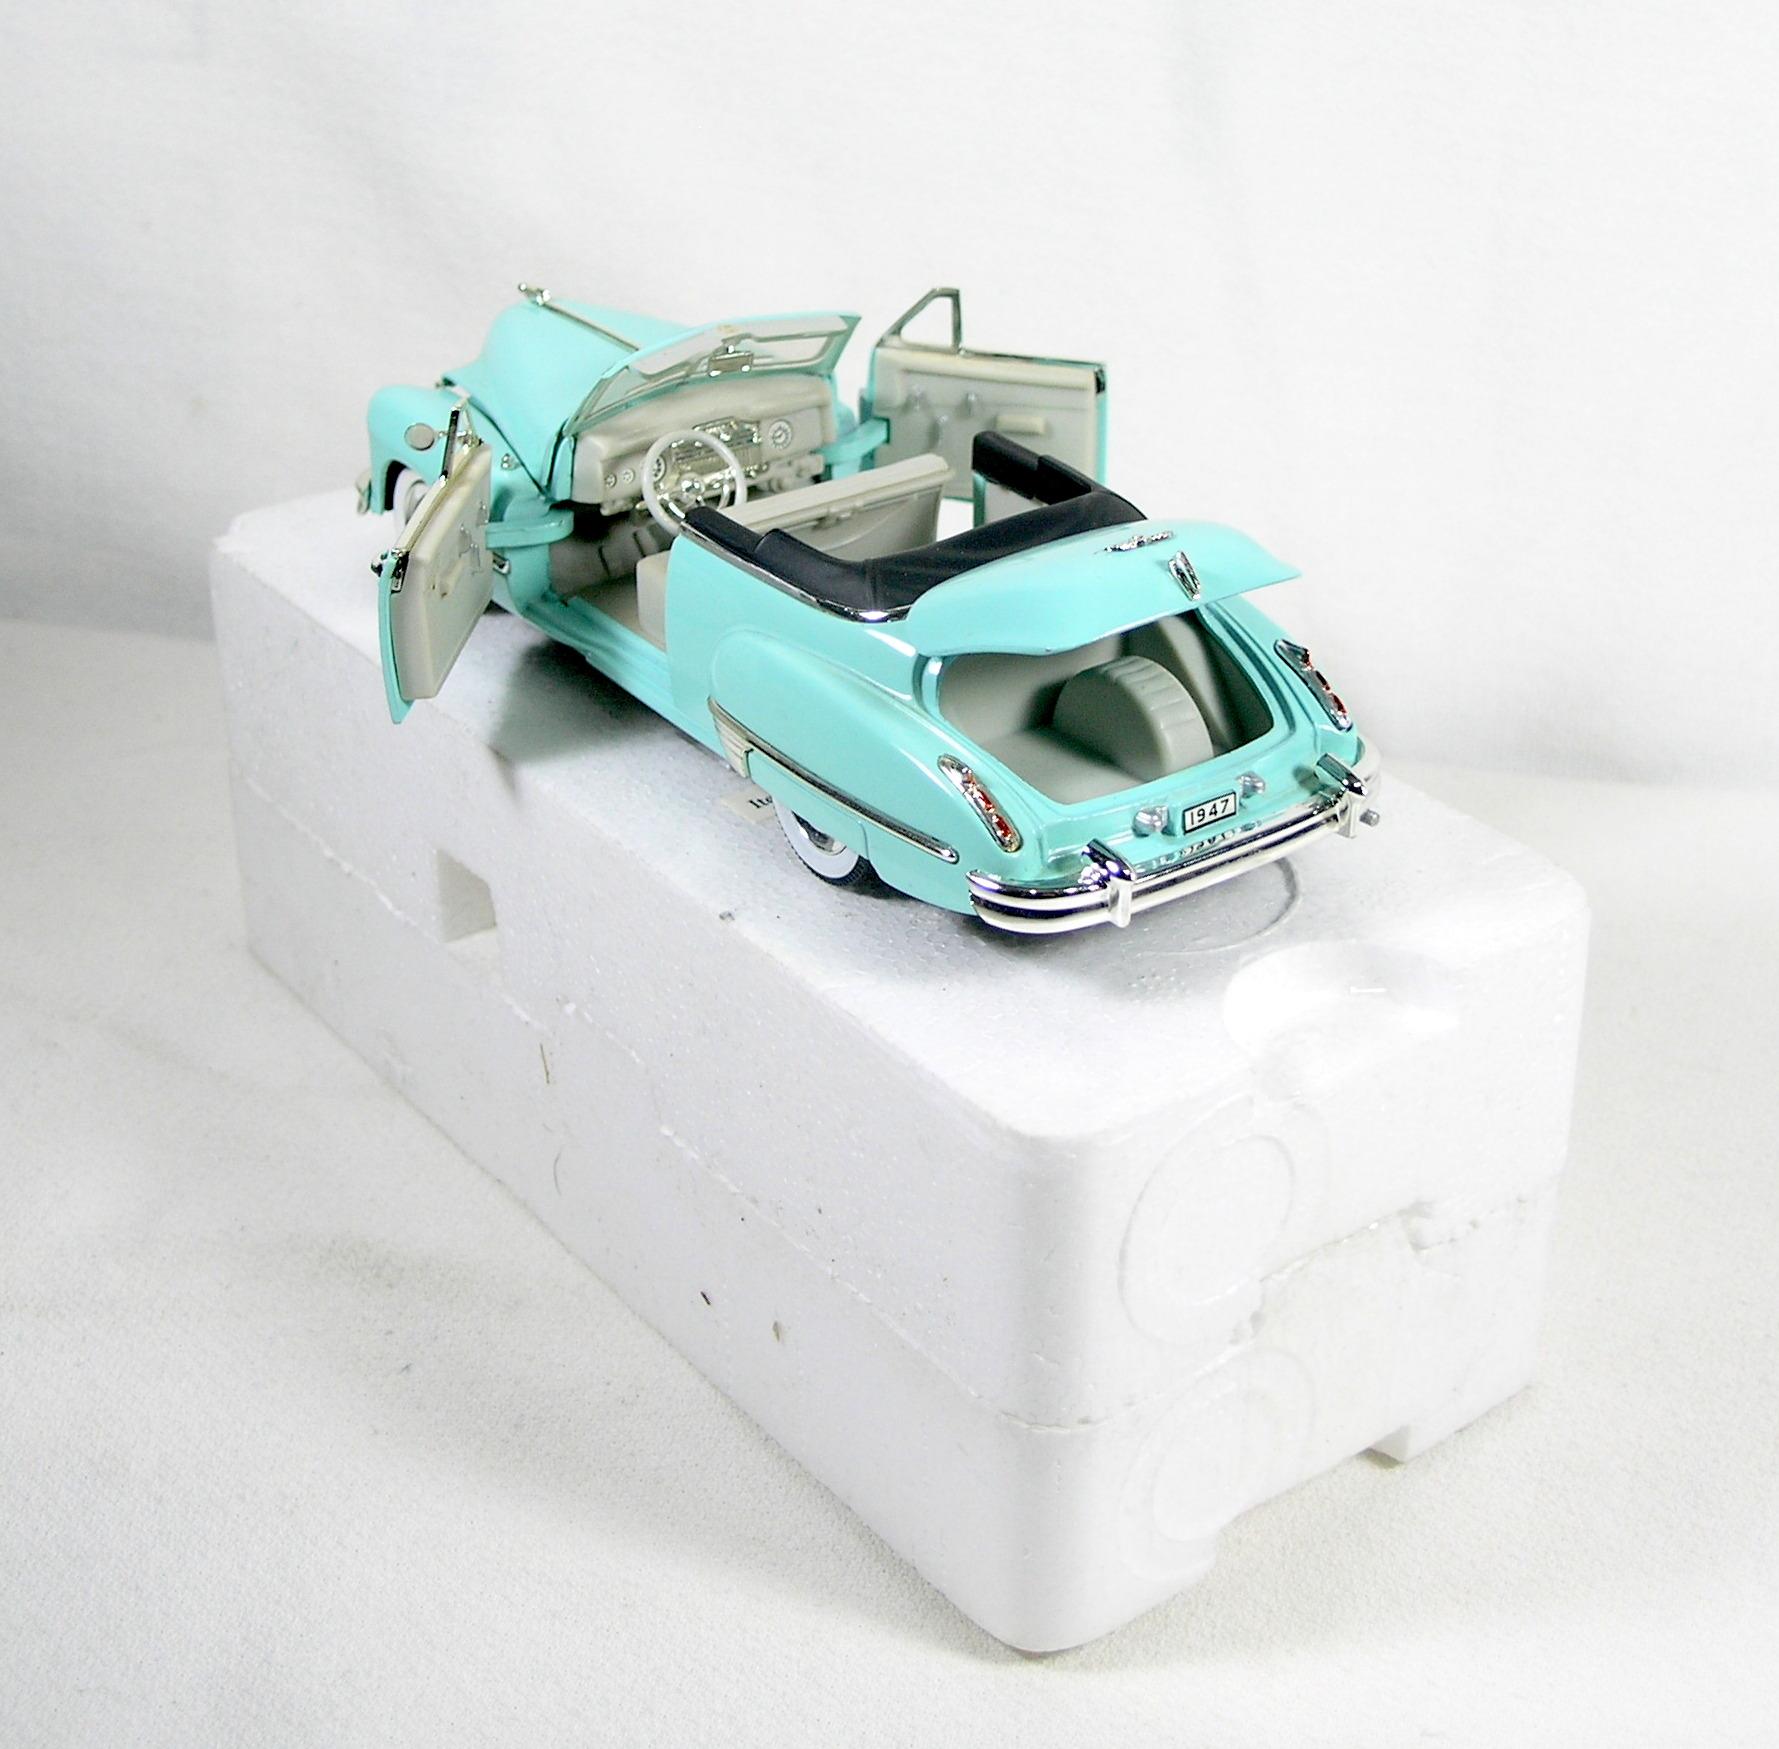 Diecast Replica of 1947 Cadillac Series 62 Soft Top from Signature Models f